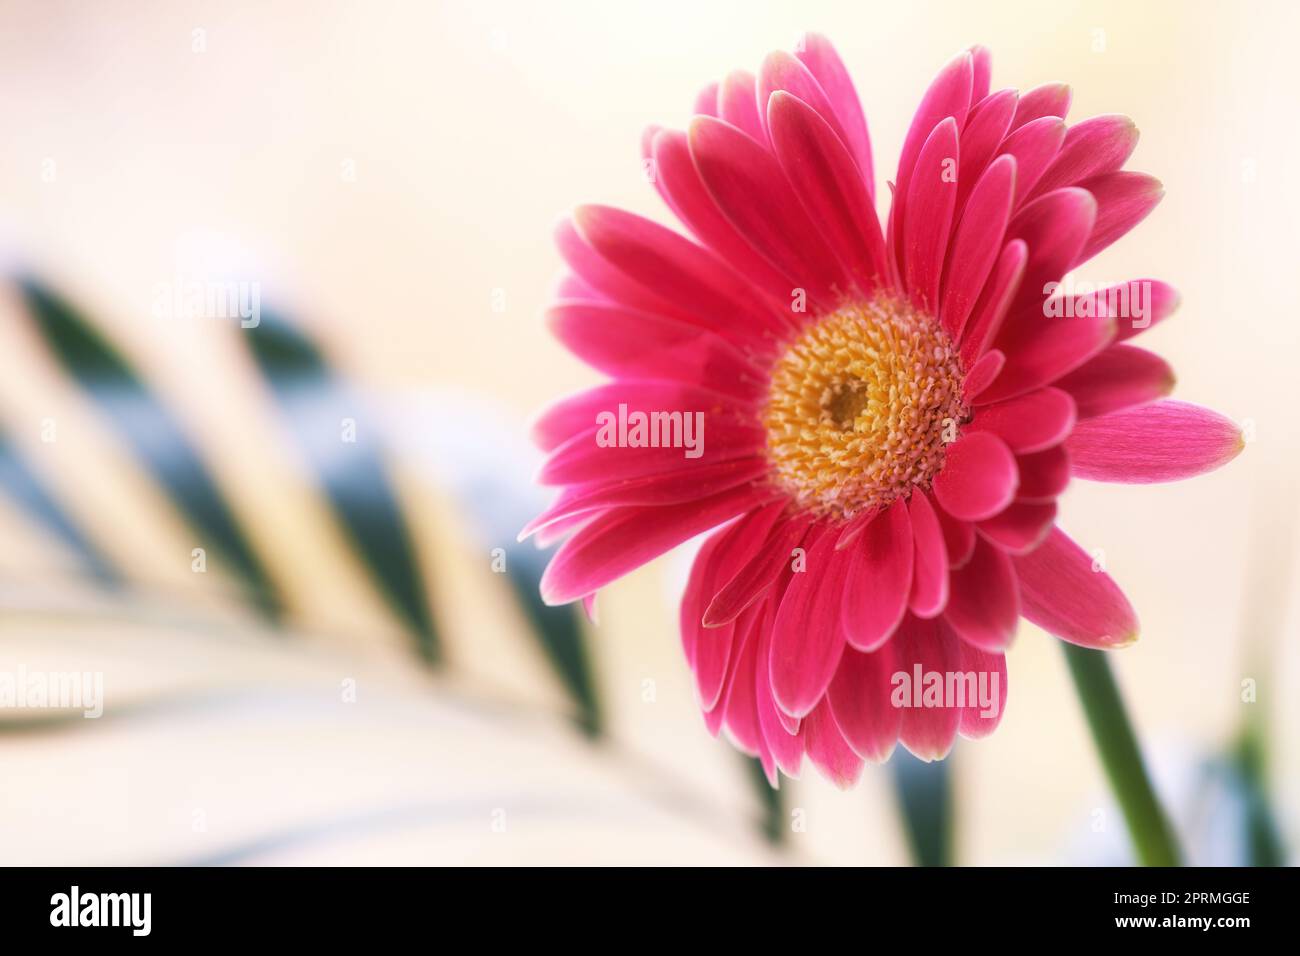 Beautiful gerbera flower. Gerbera is native to tropical regions of South America, Africa and Asia. Stock Photo